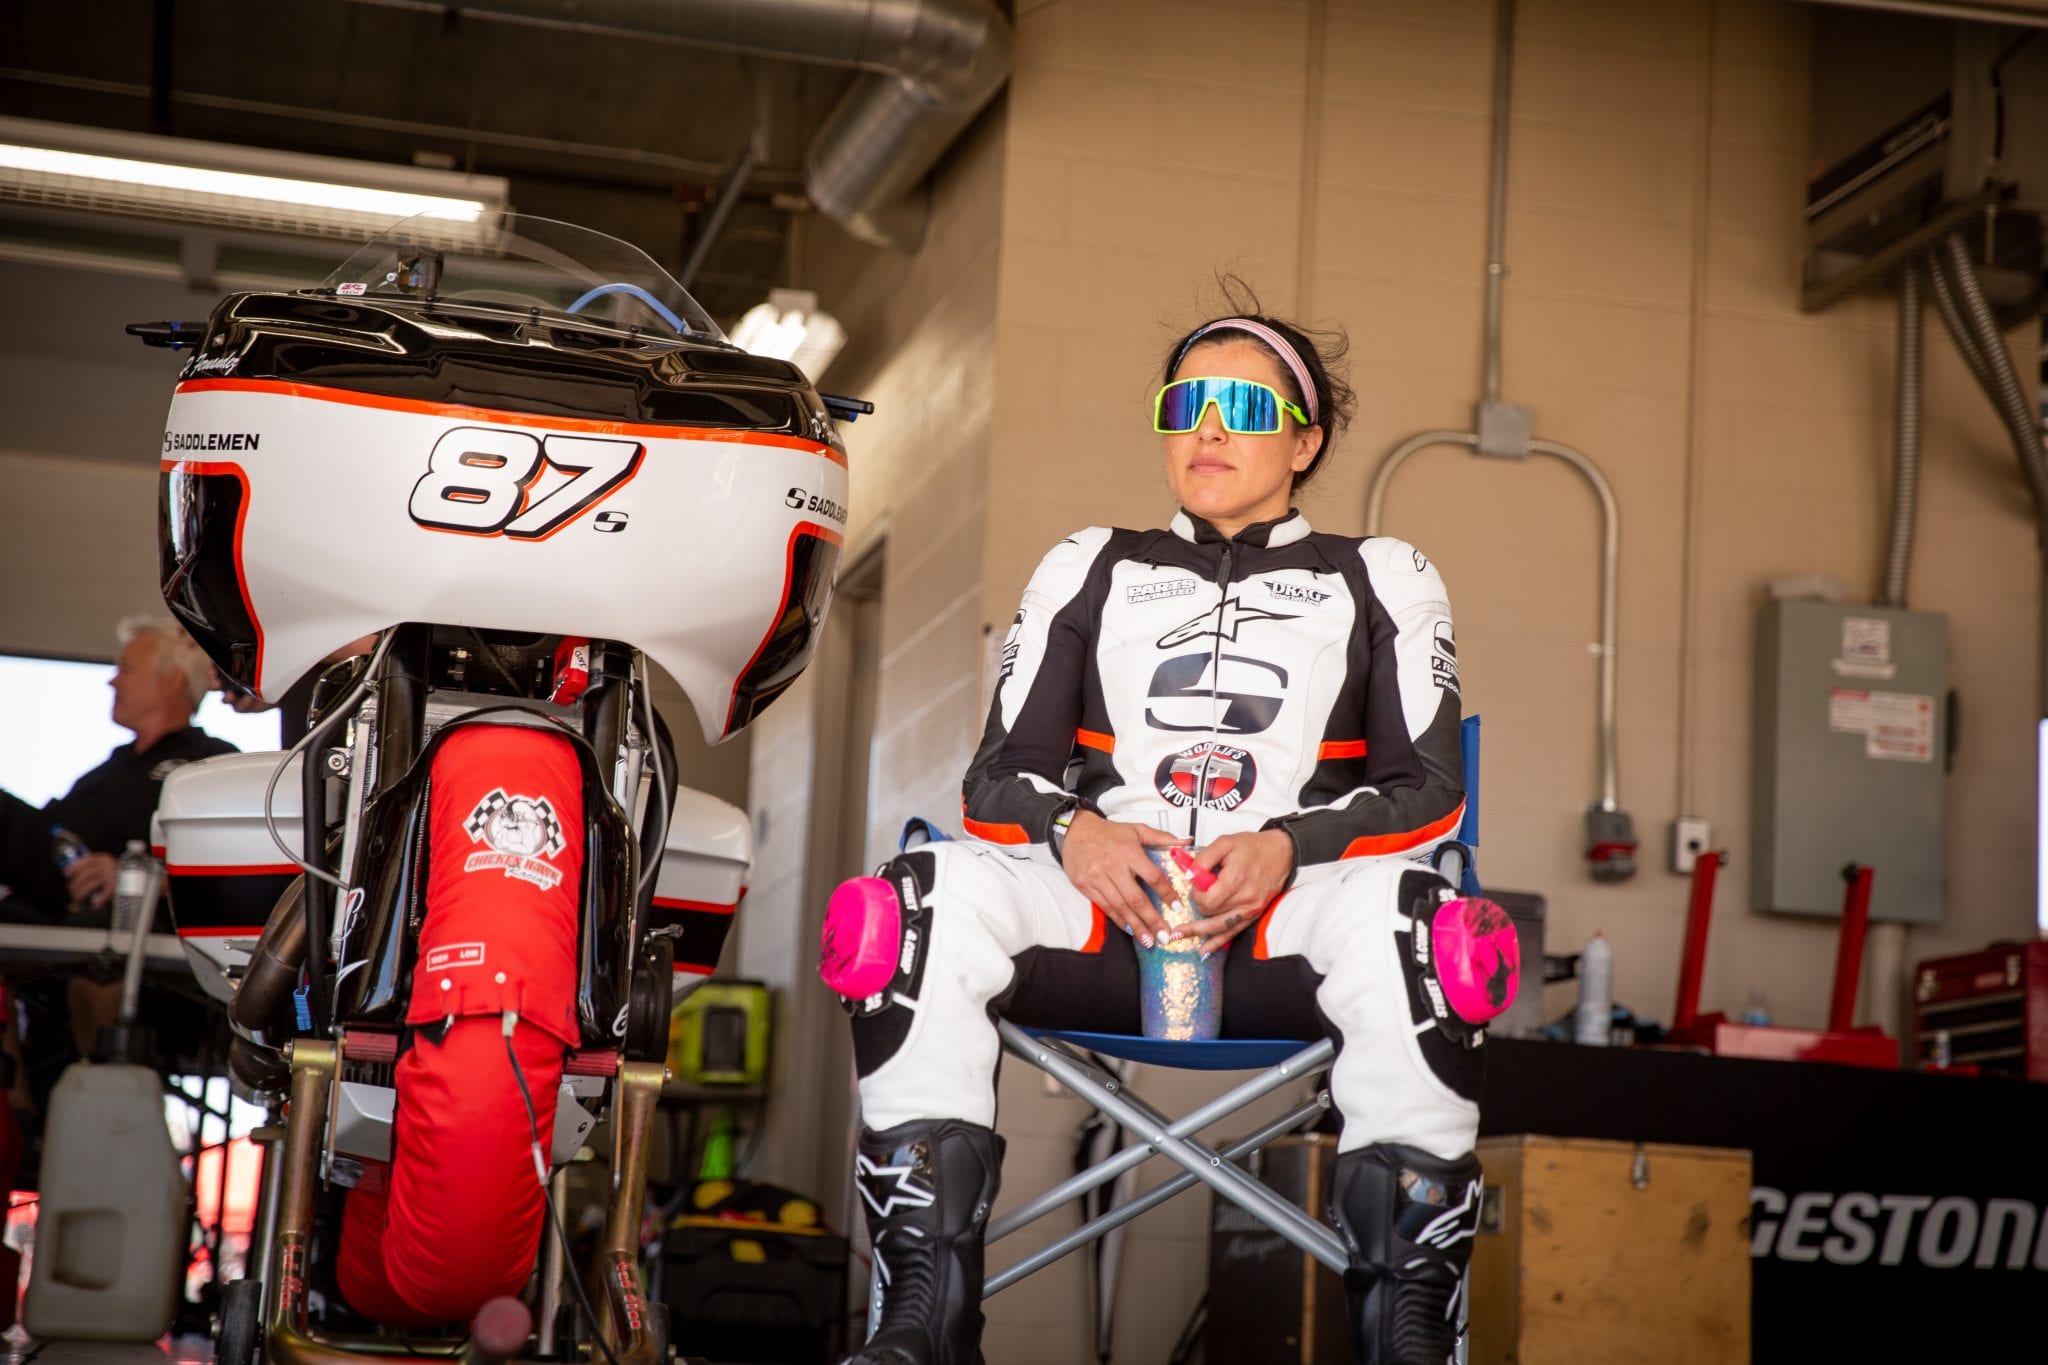 Patricia Fernandez next to her racing bagger